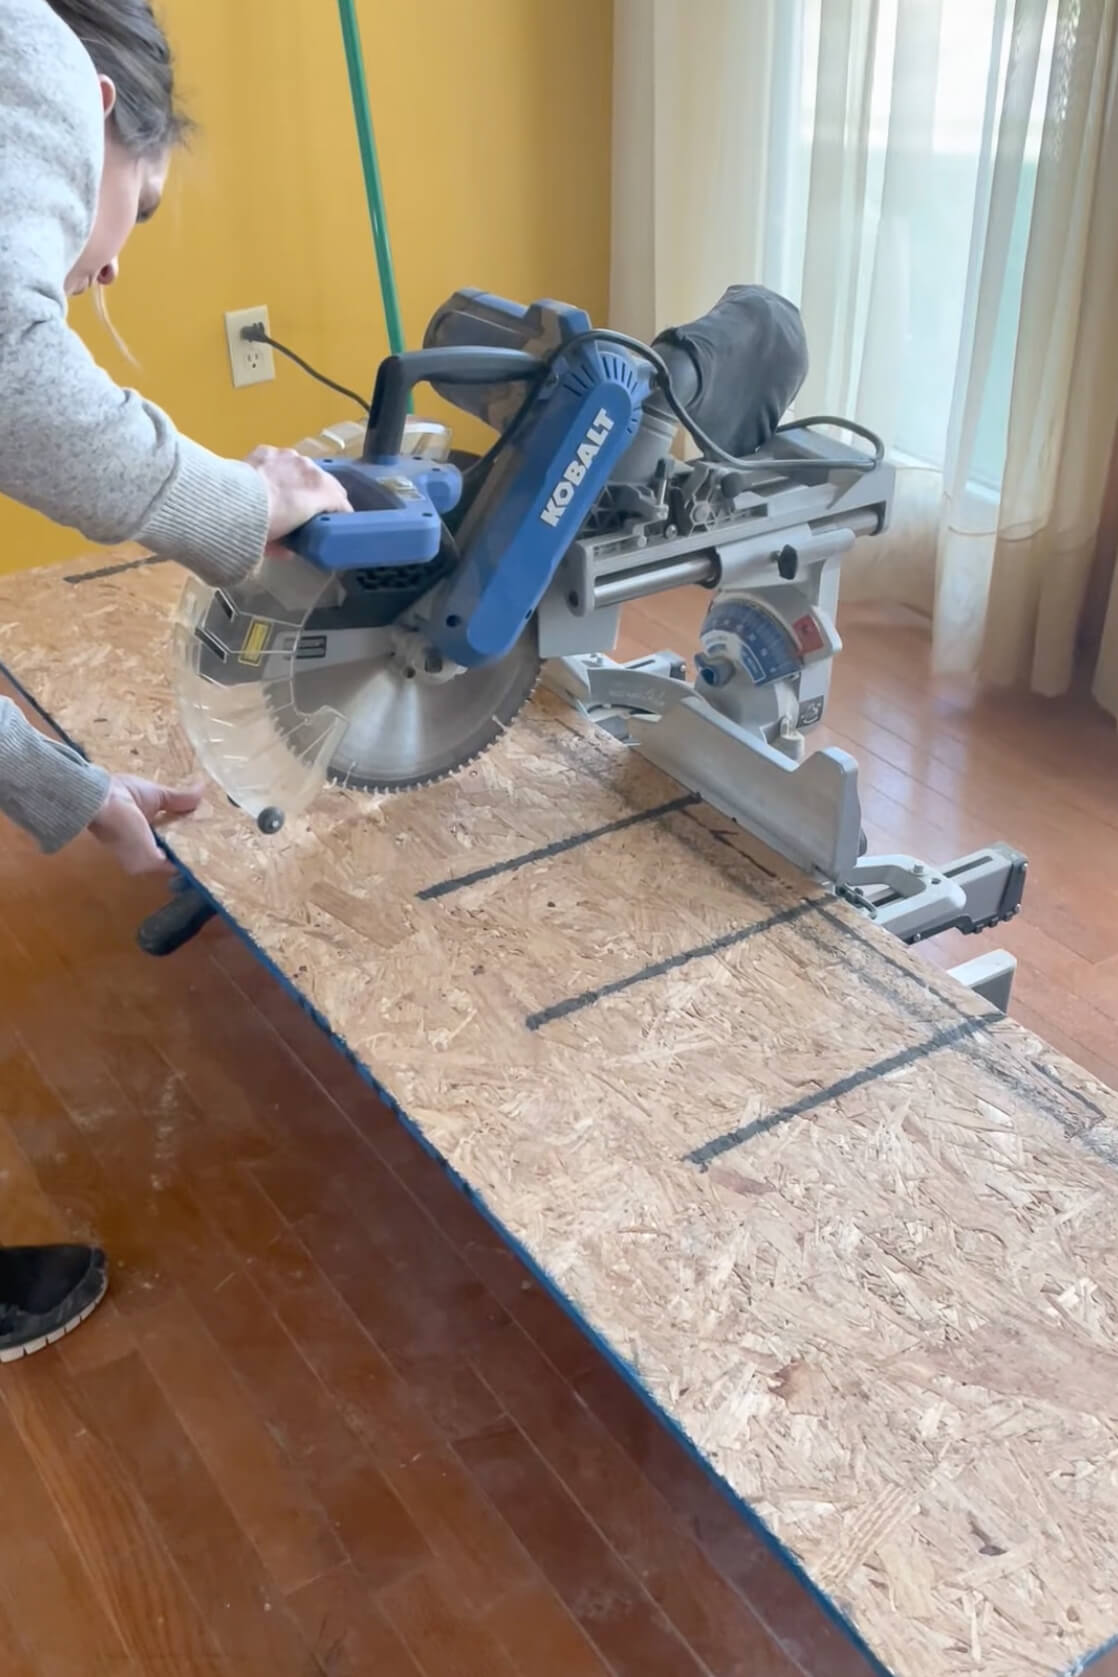 Using a miter saw to cut wood to make an arched doorway.